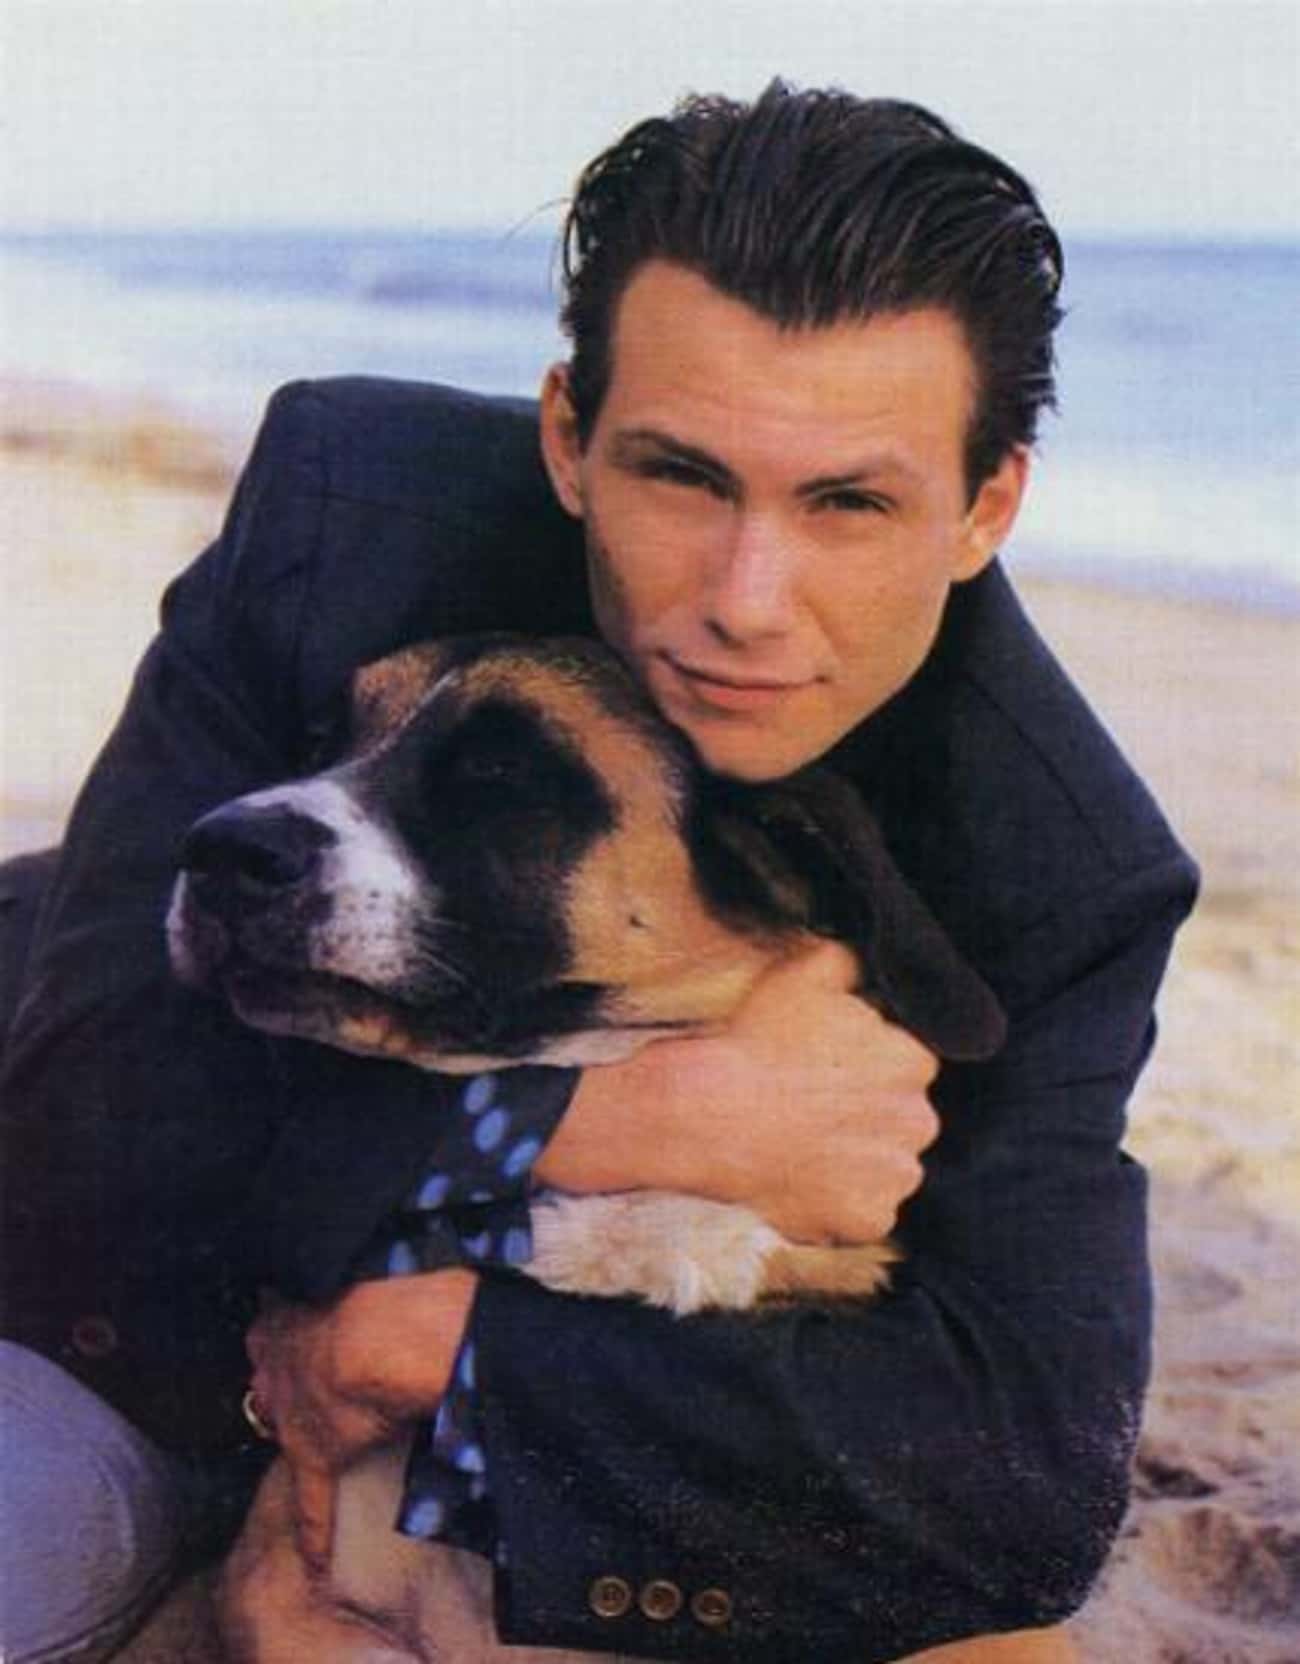 Young Christian Slater in Black Sports Jacket Holding Dog